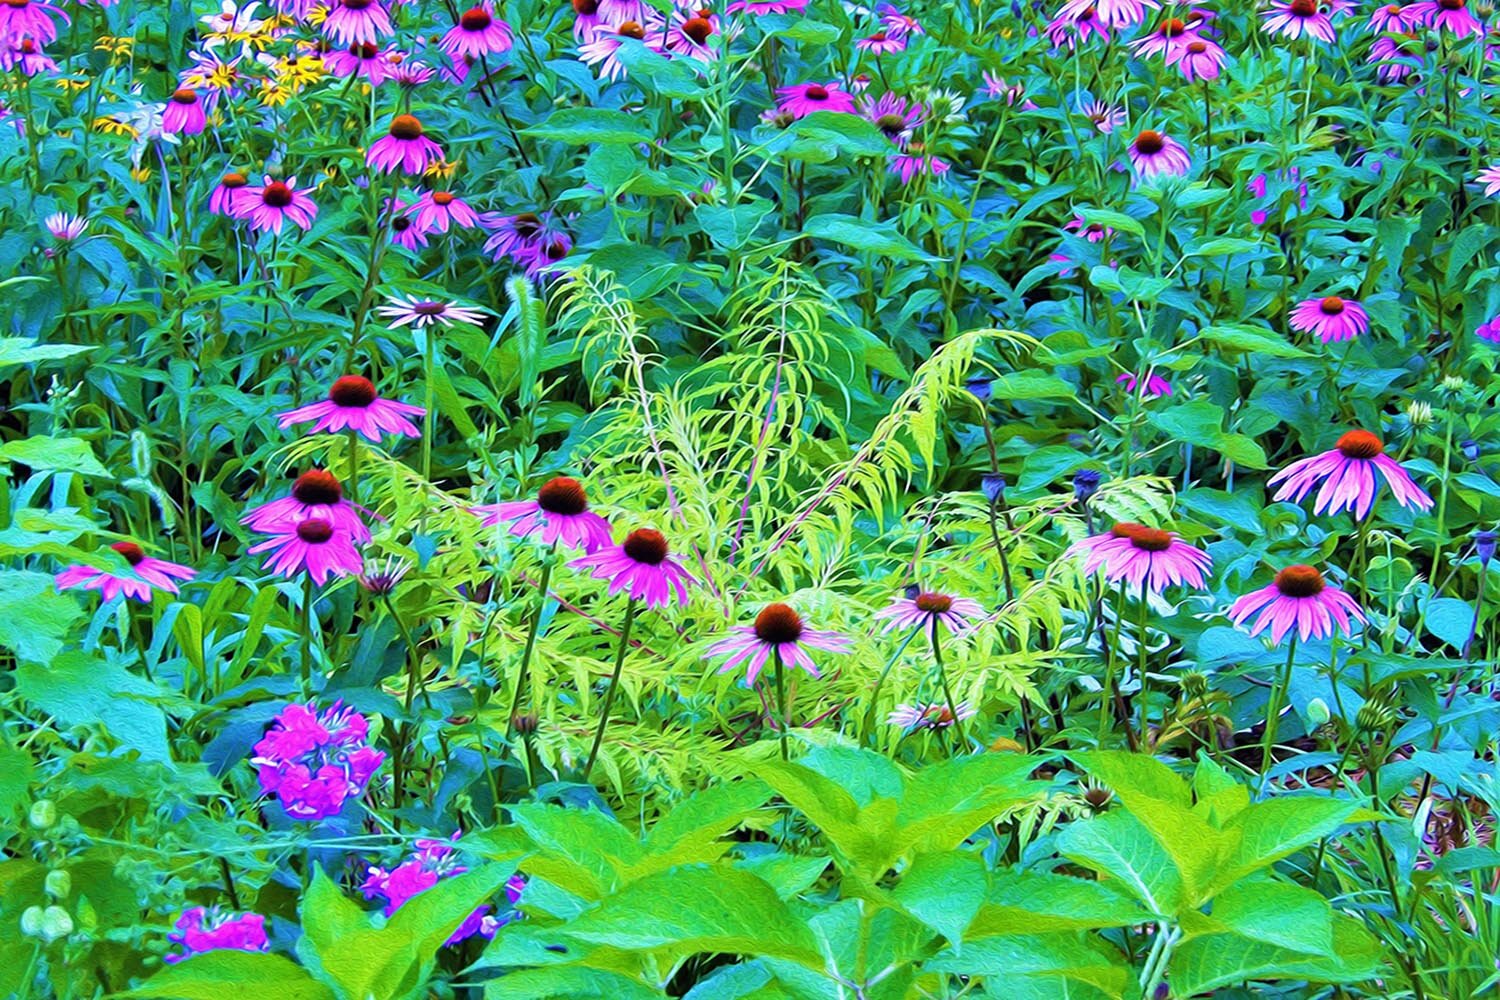 Purple Coneflower Garden with Chartreuse Foliage